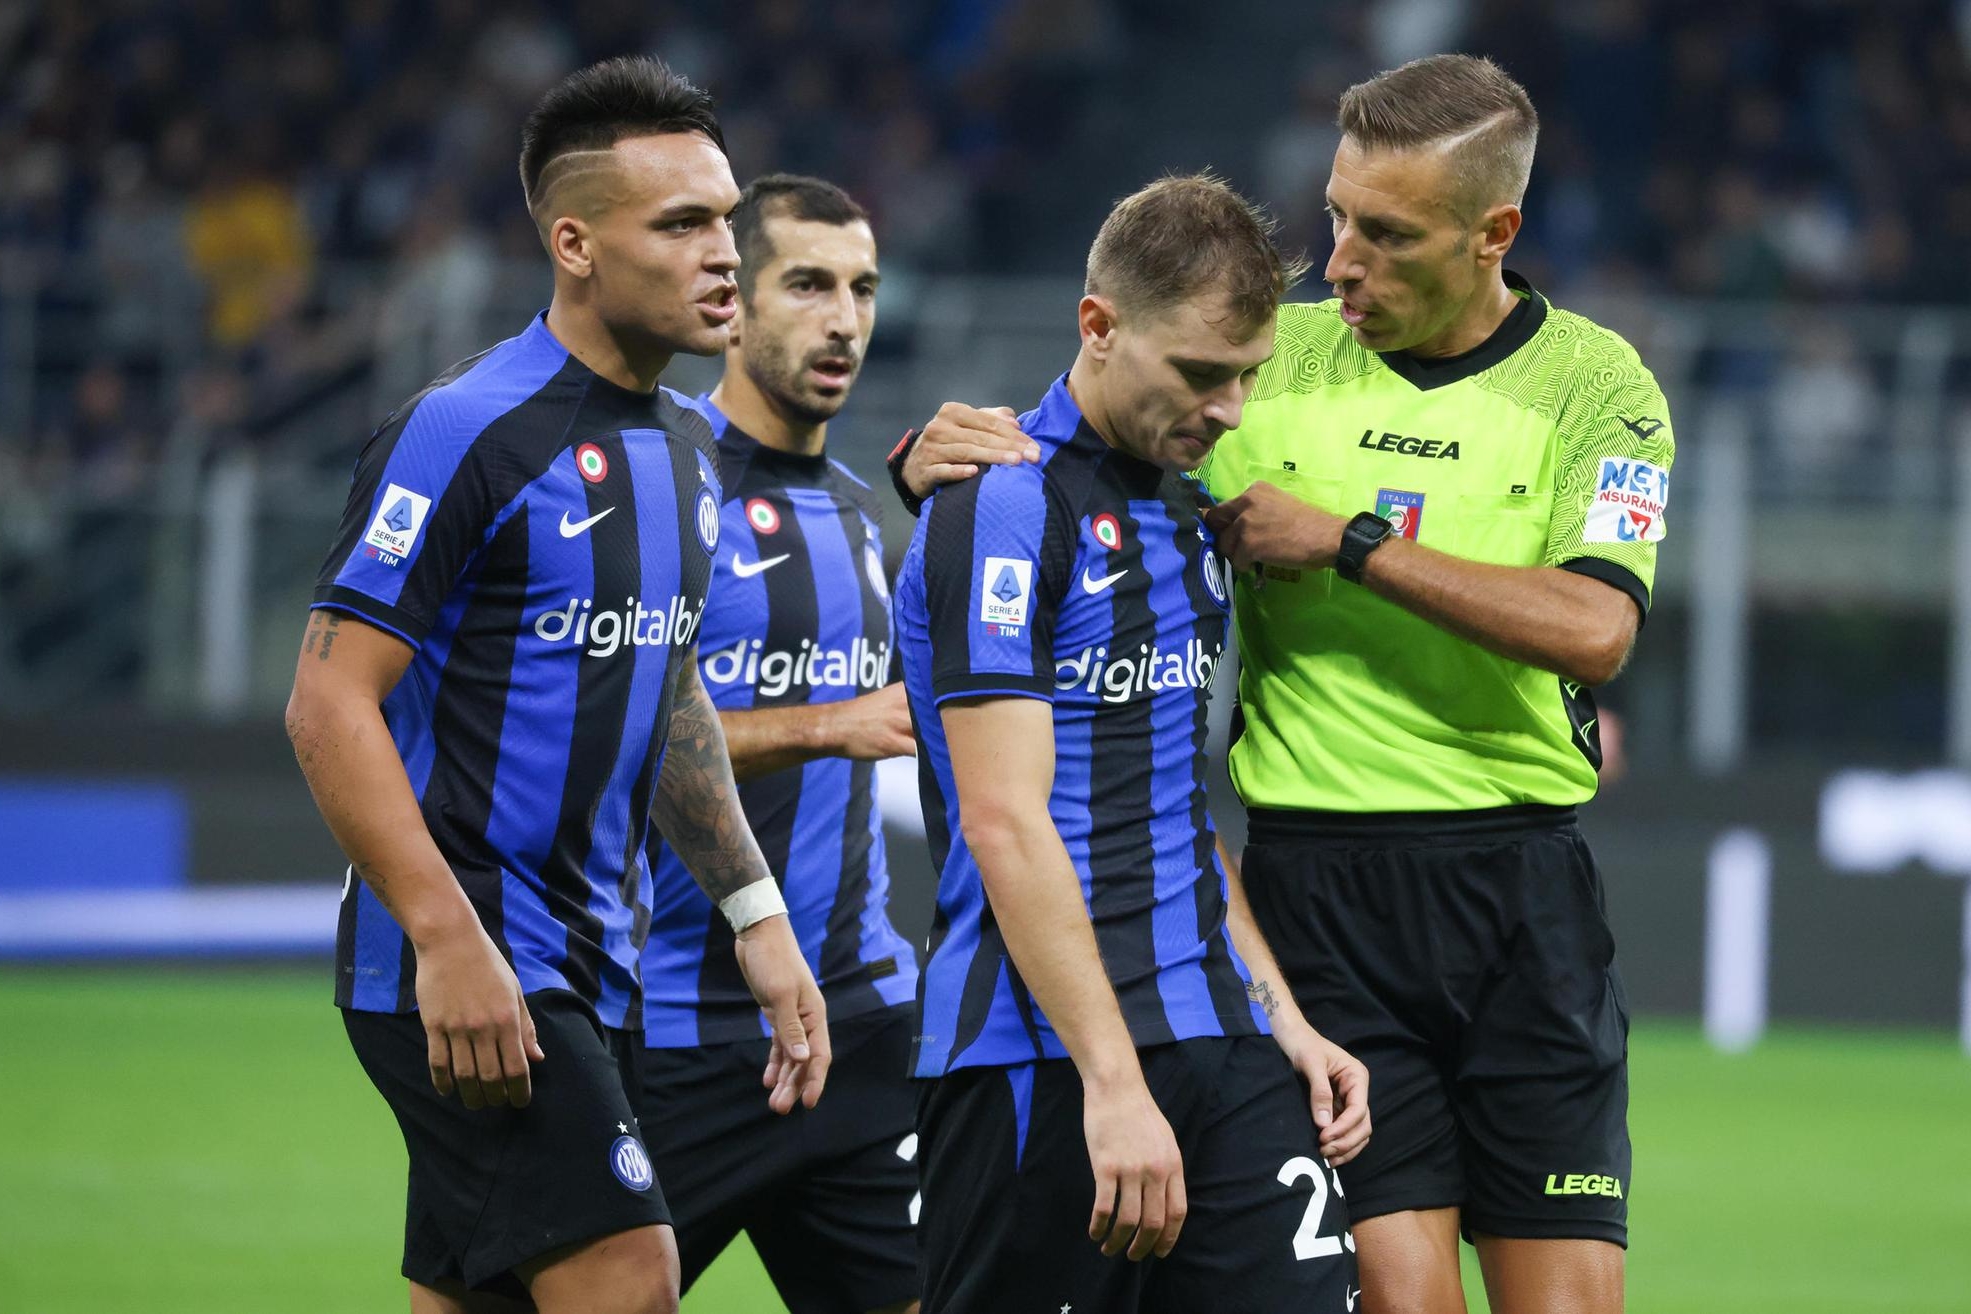 From L to R: Inter Milan’s Lautaro Martinez and his teammates Henrih Mkhitaryan and Nicolo Barella speaks with the referee Davide Massa during the Italian serie A soccer match between FC Inter and As Roma Giuseppe Meazza stadium in Milan, 1 October 2022. ANSA / MATTEO BAZZI